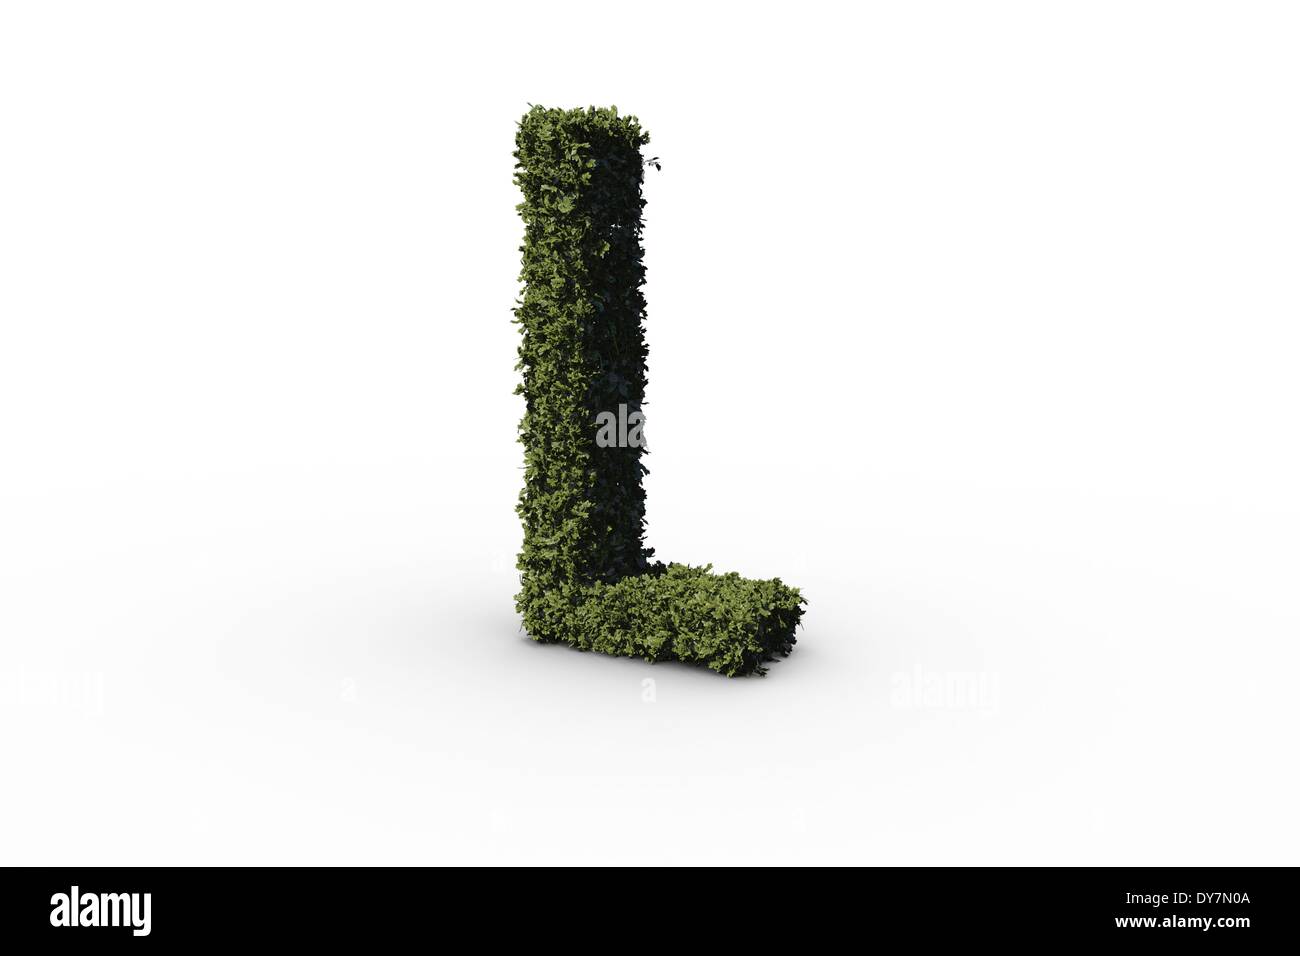 Capital letter l made of leaves Stock Photo